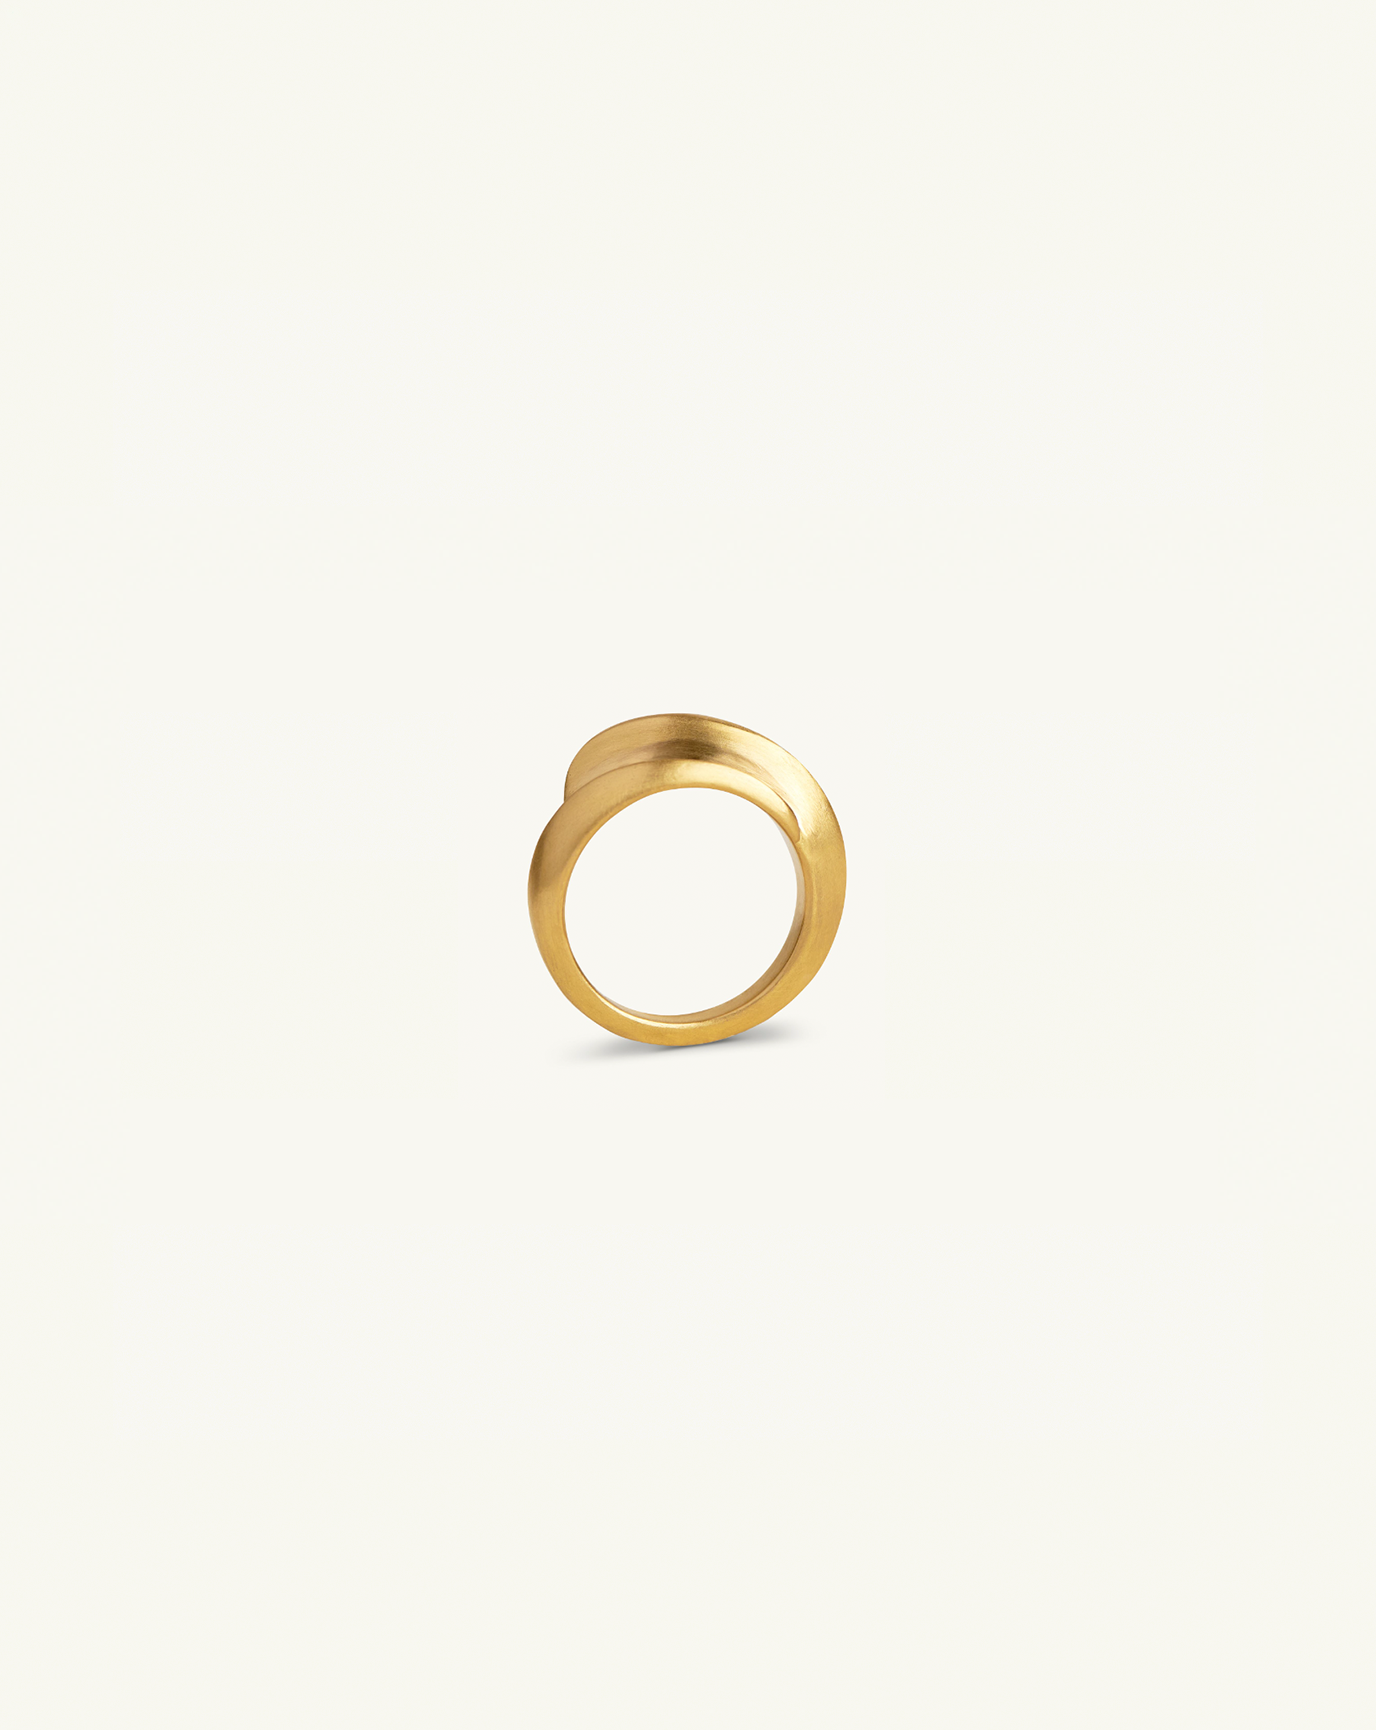 Product image of the sculptural ring in gold